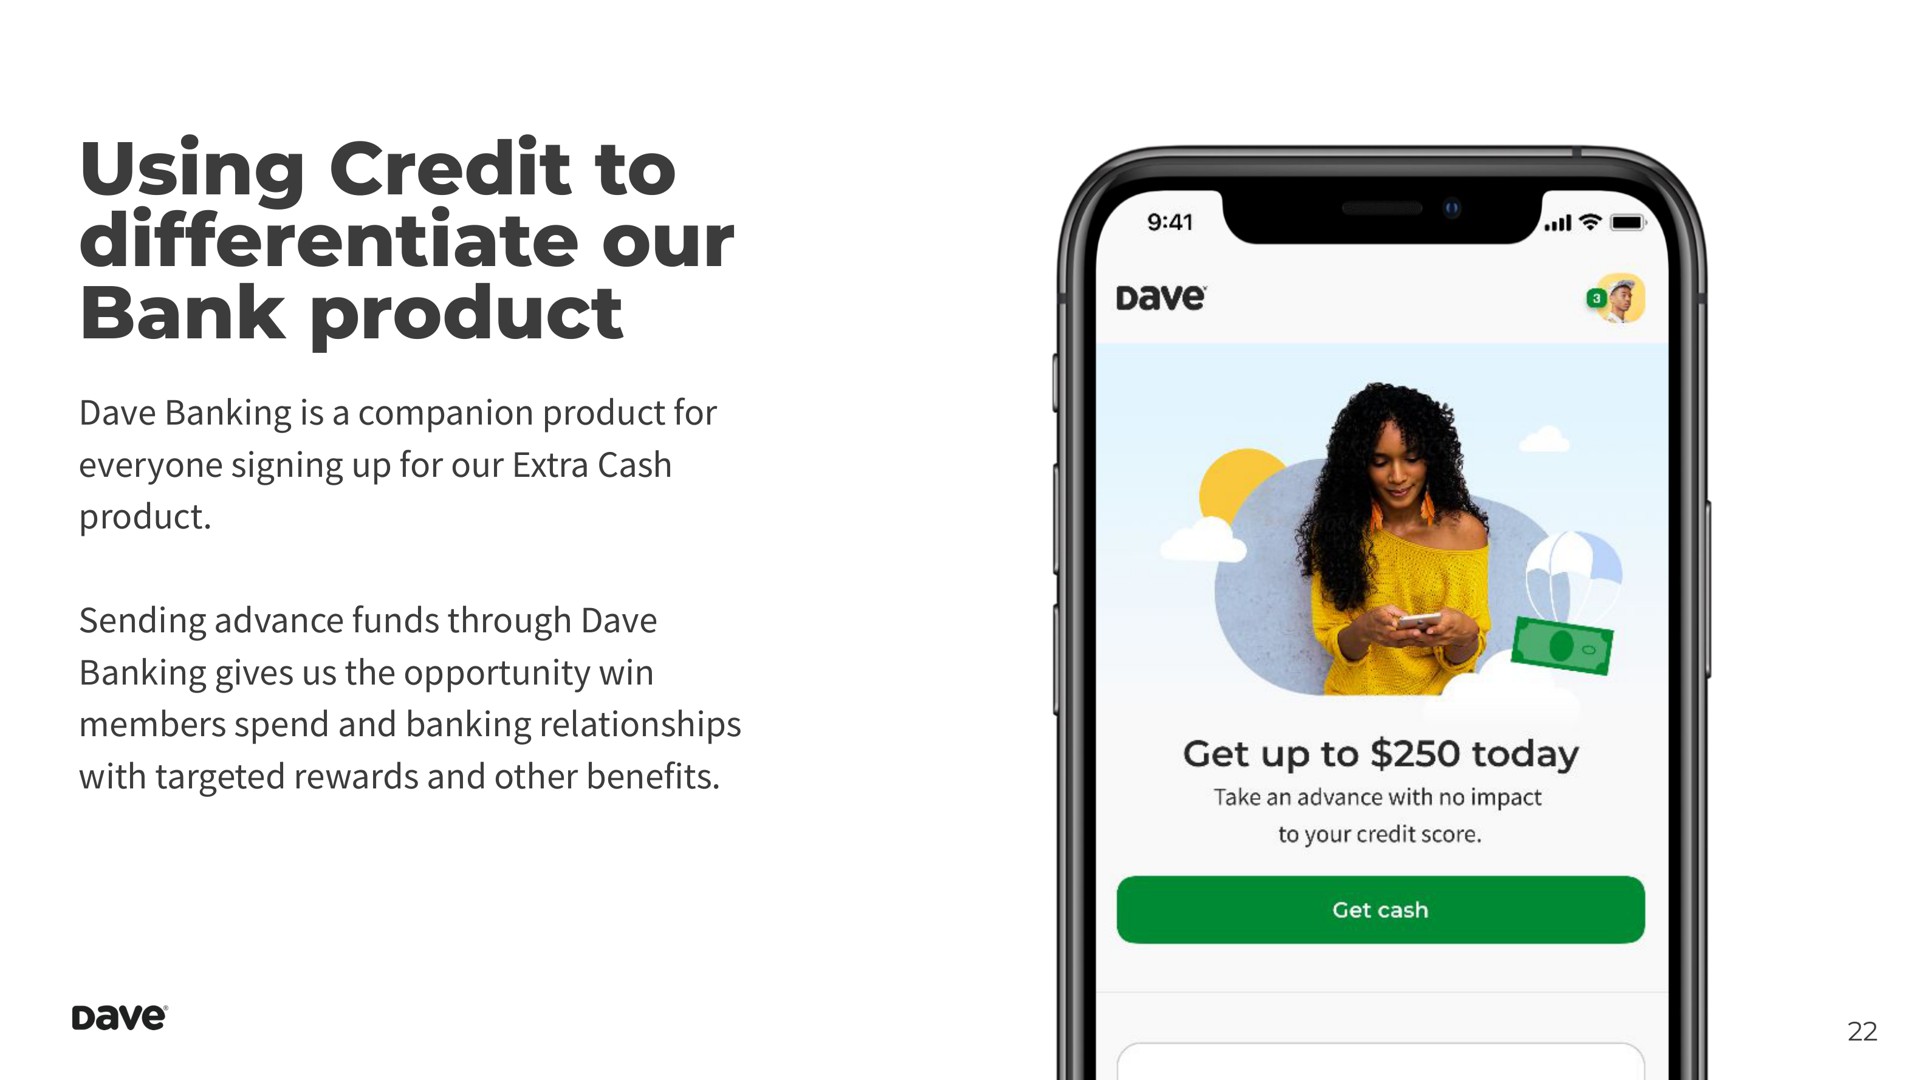 using credit to differentiate our bank product banking is a companion product for everyone signing up for our extra cash product sending advance funds through banking gives us the opportunity win members spend and banking relationships with targeted rewards and other benefits | Dave